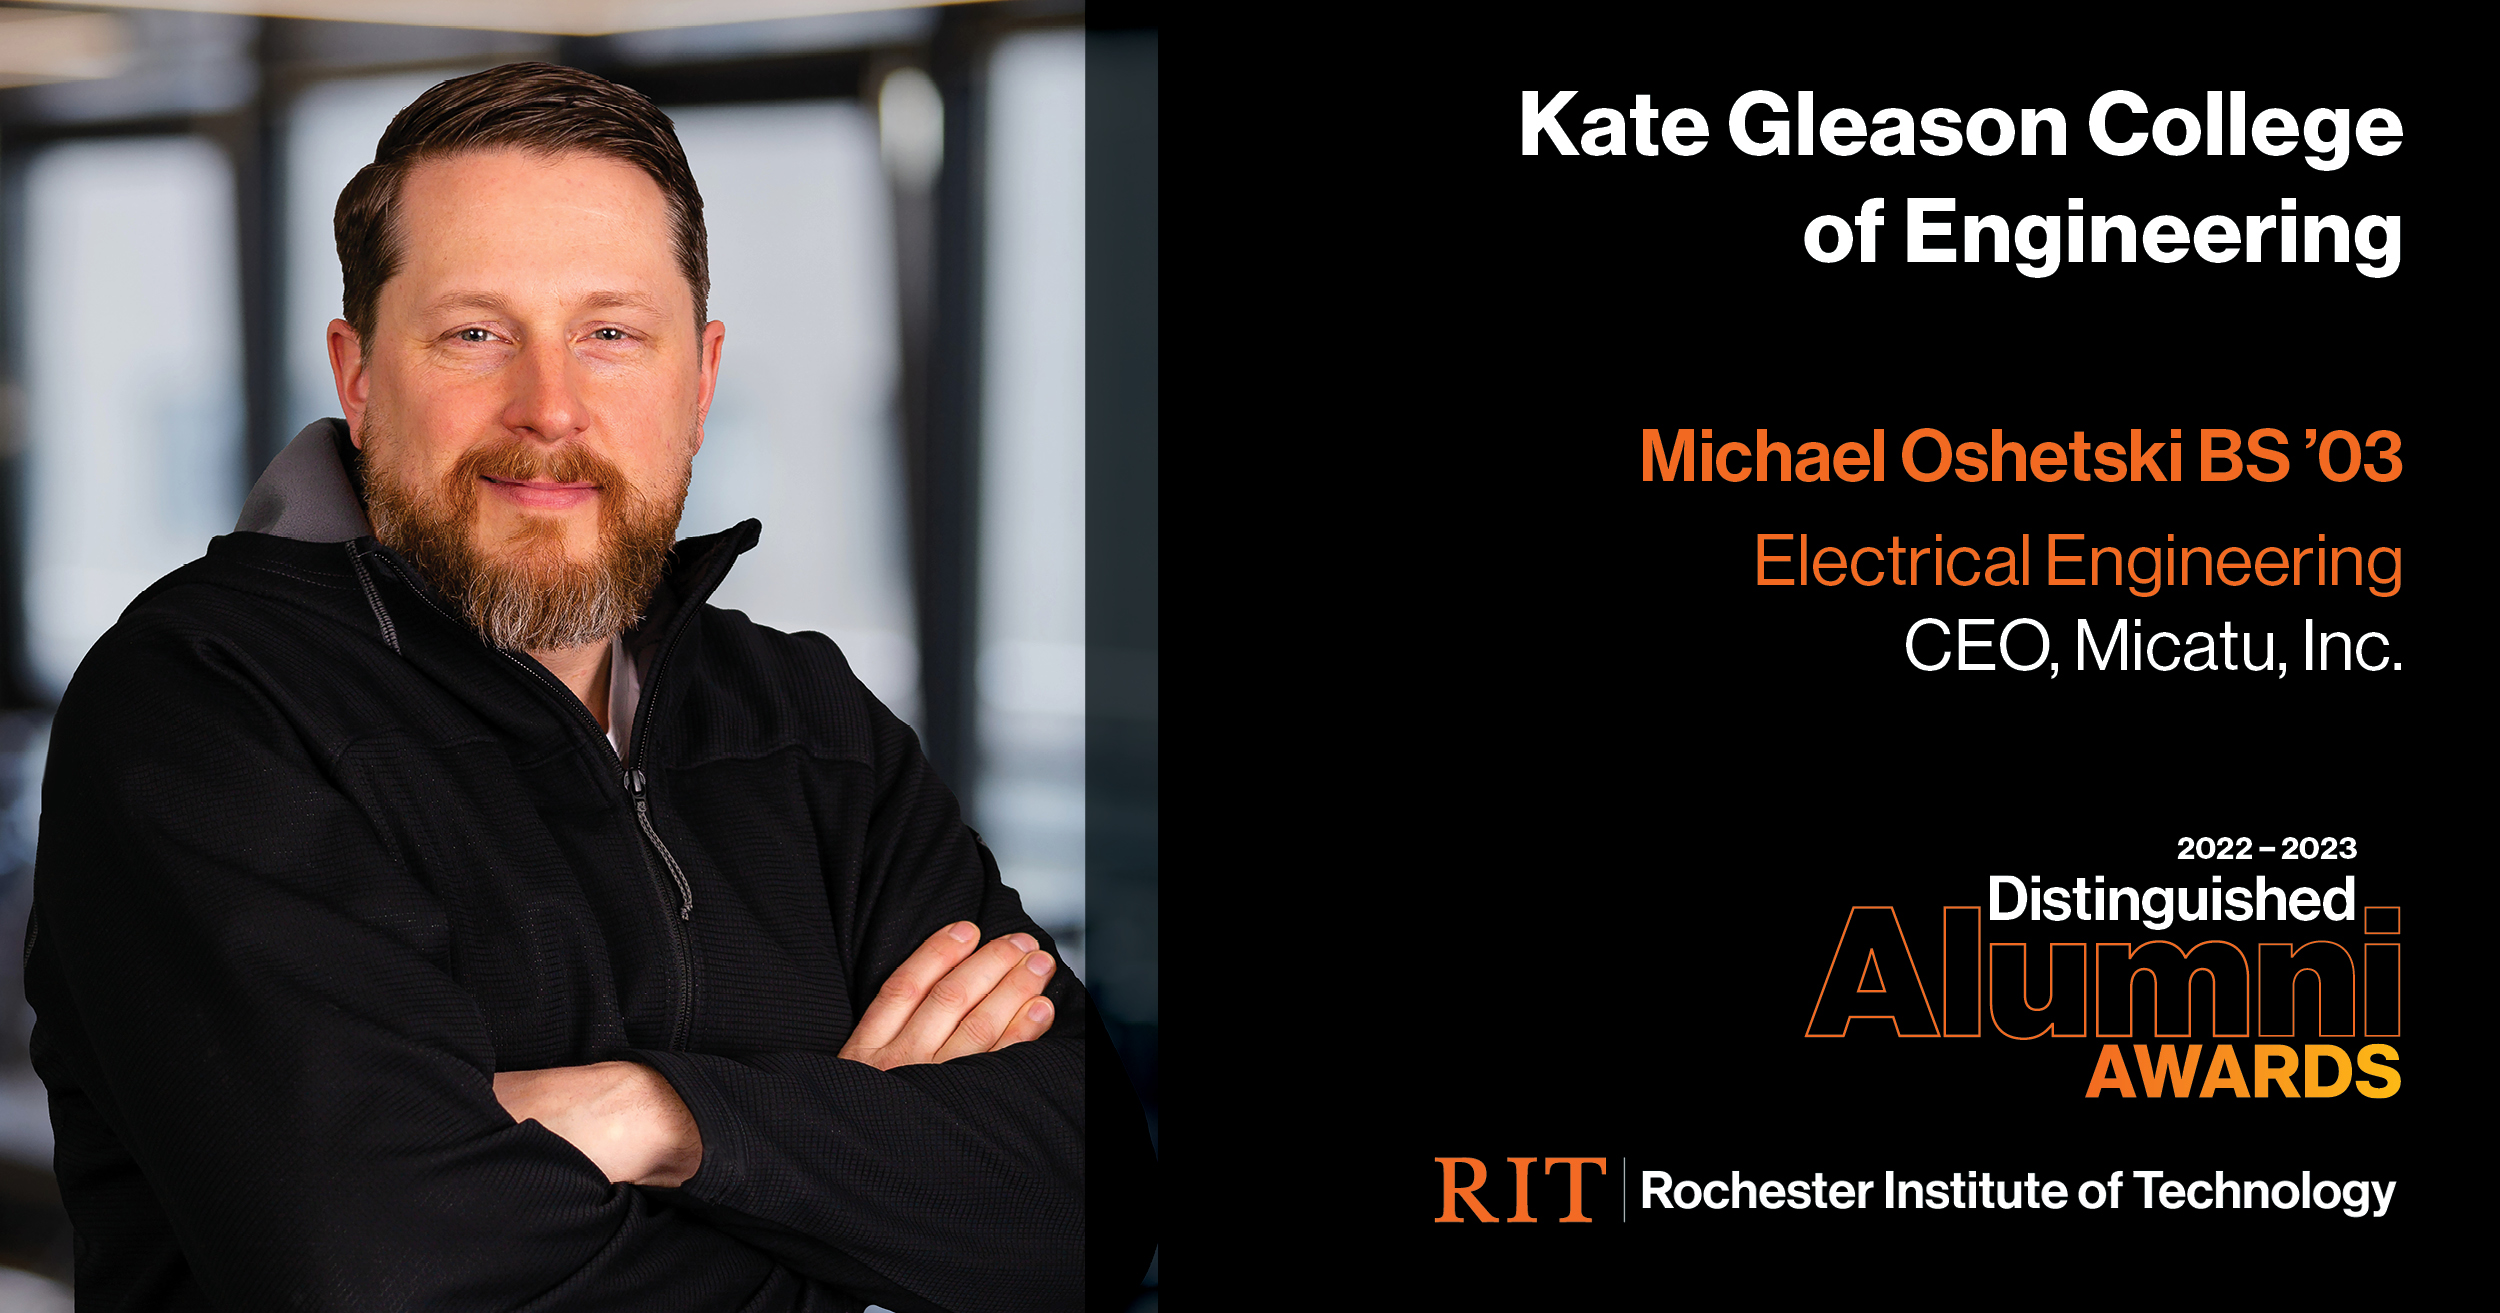 Image on Left: Head shot Robert Spina   Text on RIght: Kate Gleason College of Engineering Robert Spina, Ph.D., MS '89 Electrical Engineering Chief Technology Officer, Bowhead Specialty Insurance 2021-2022 Alumni Awards RIT | Rochester Institute of Technology